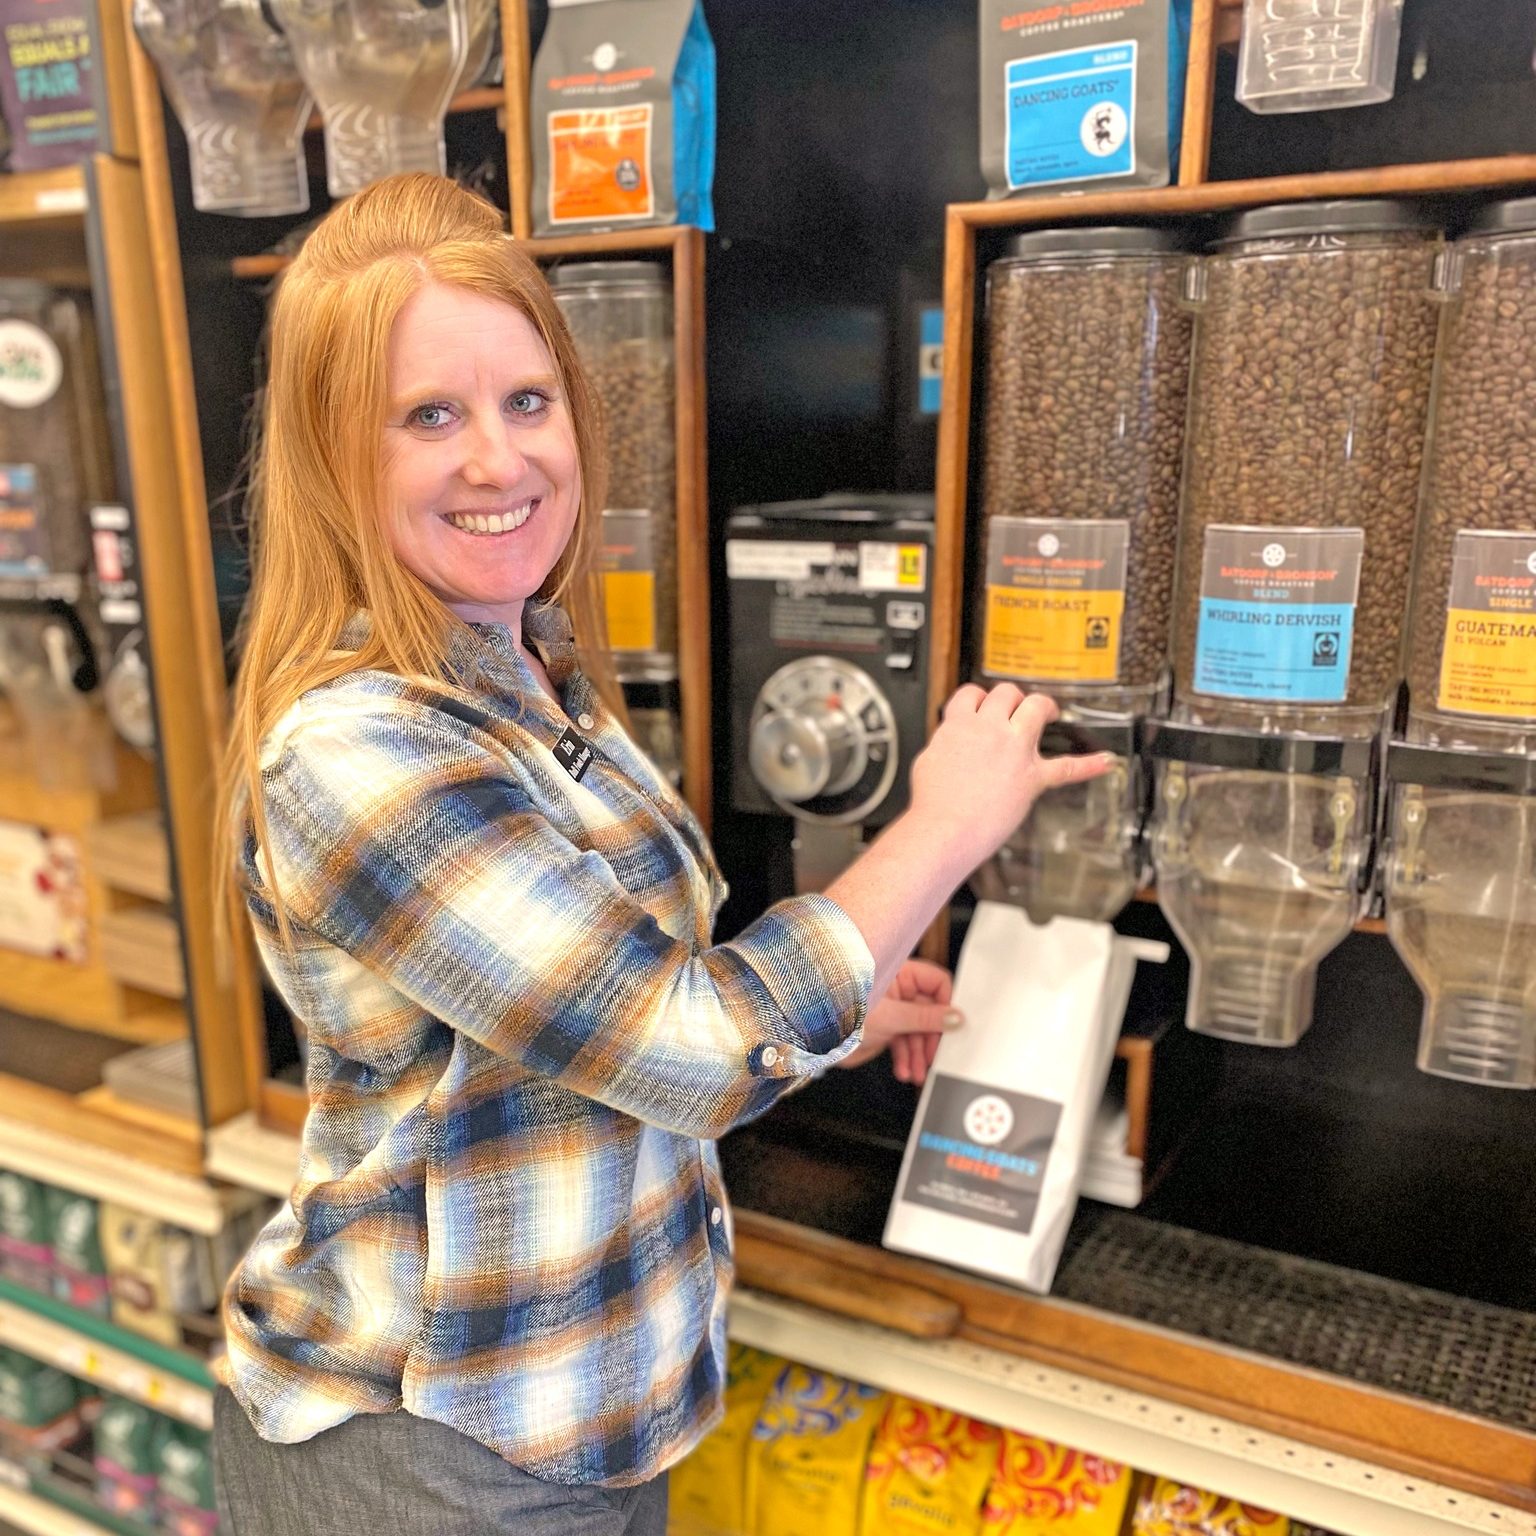 a woman in a grocery store puts fresh coffee from a depenser into a bag.